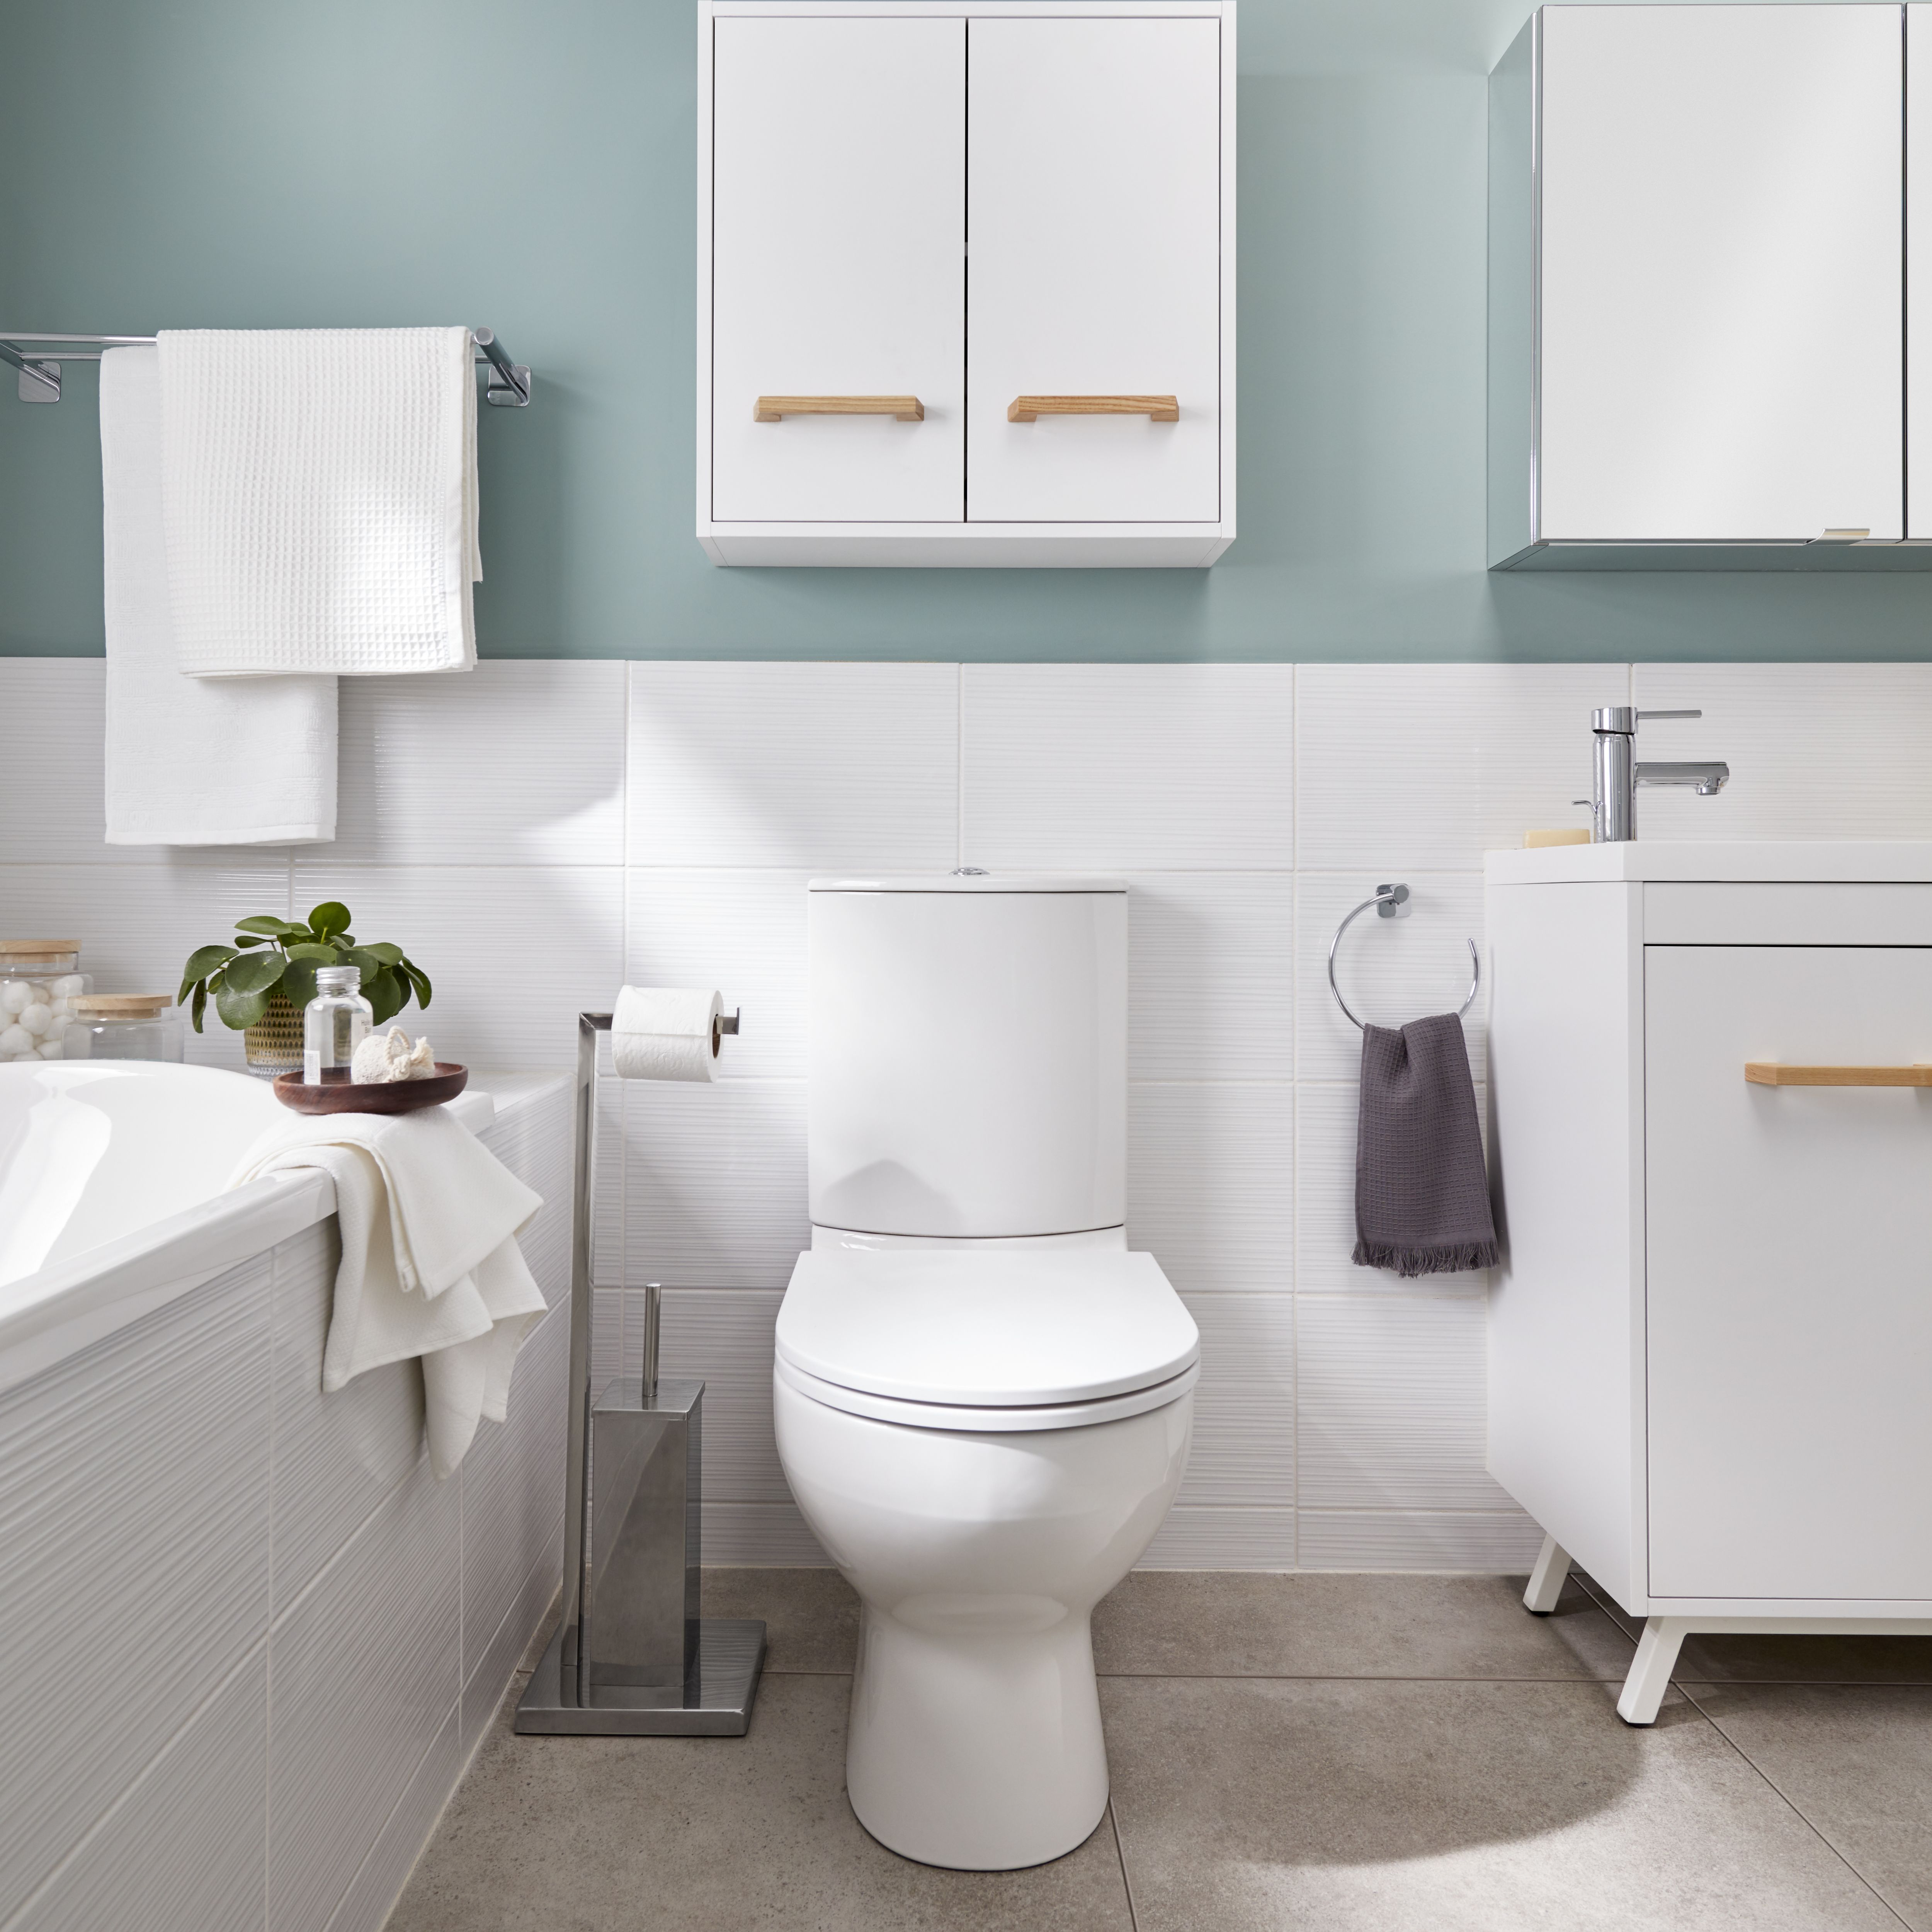 GoodHome Cavally White Close-coupled Floor-mounted Toilet & full pedestal basin